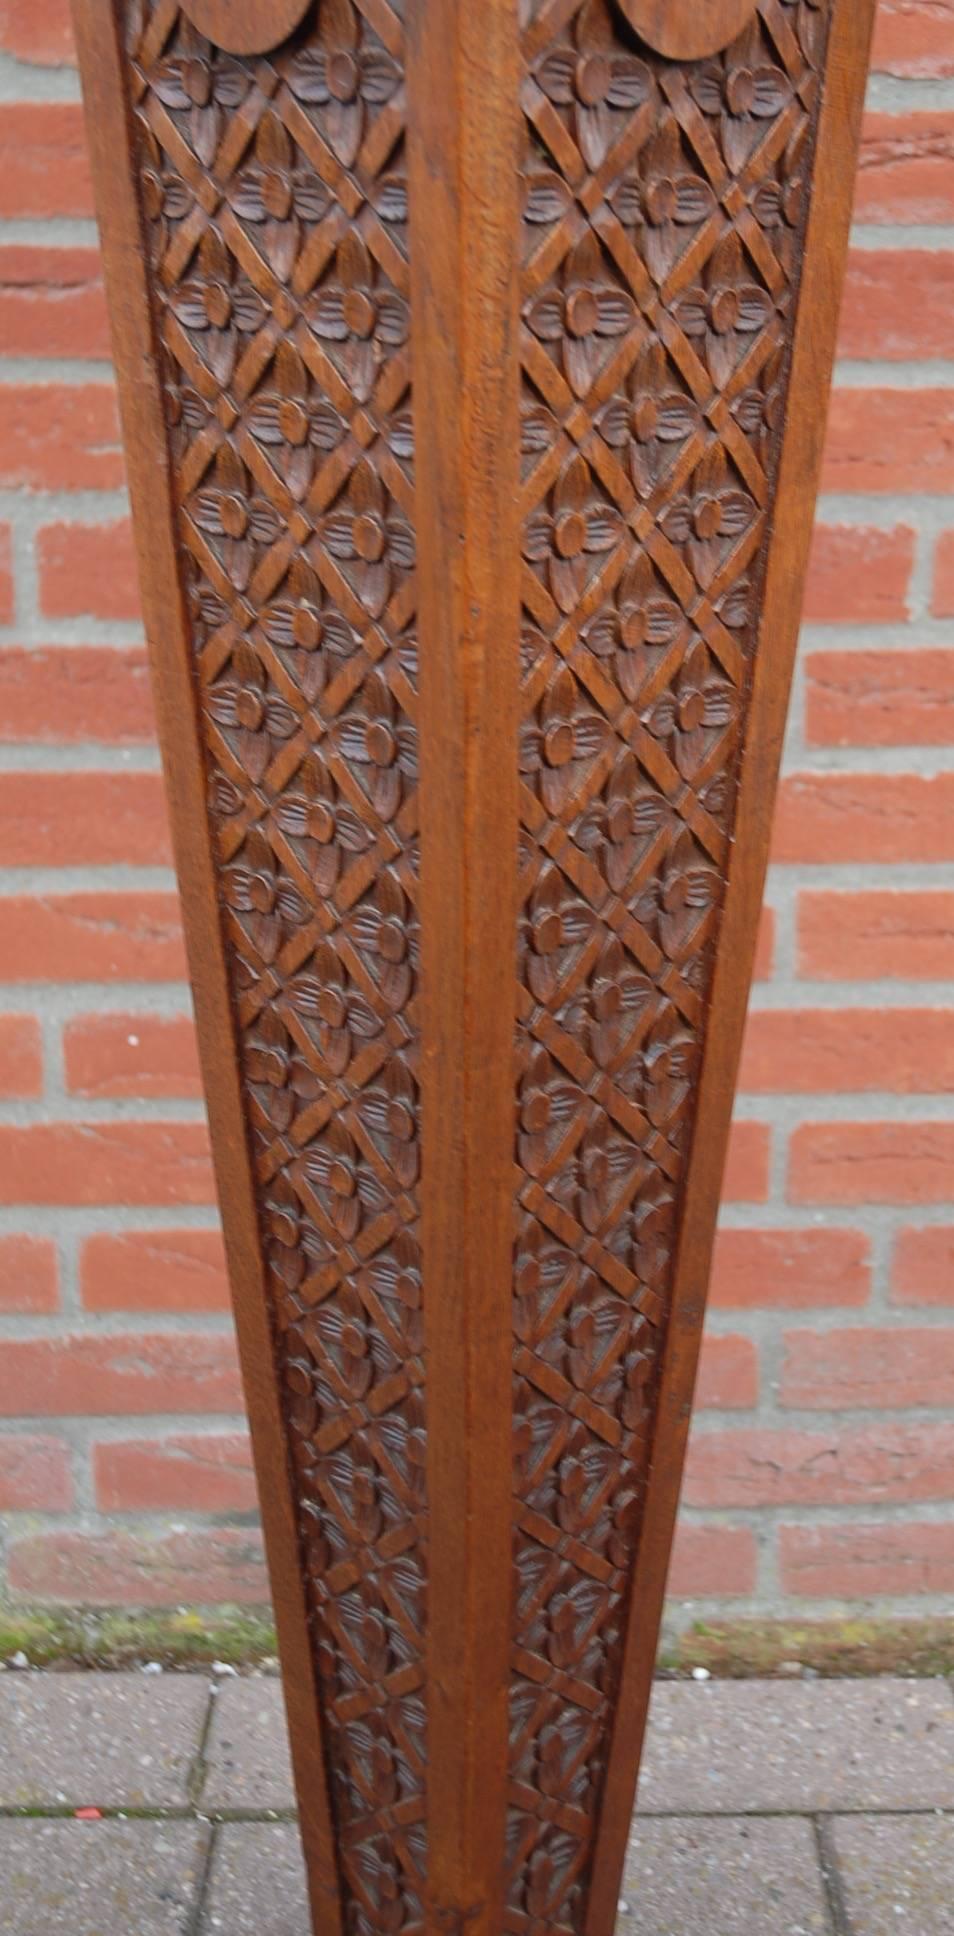 French Turn of the Century Hand-Carved Art Nouveau Sculpture or Plant Stand, Pedestal